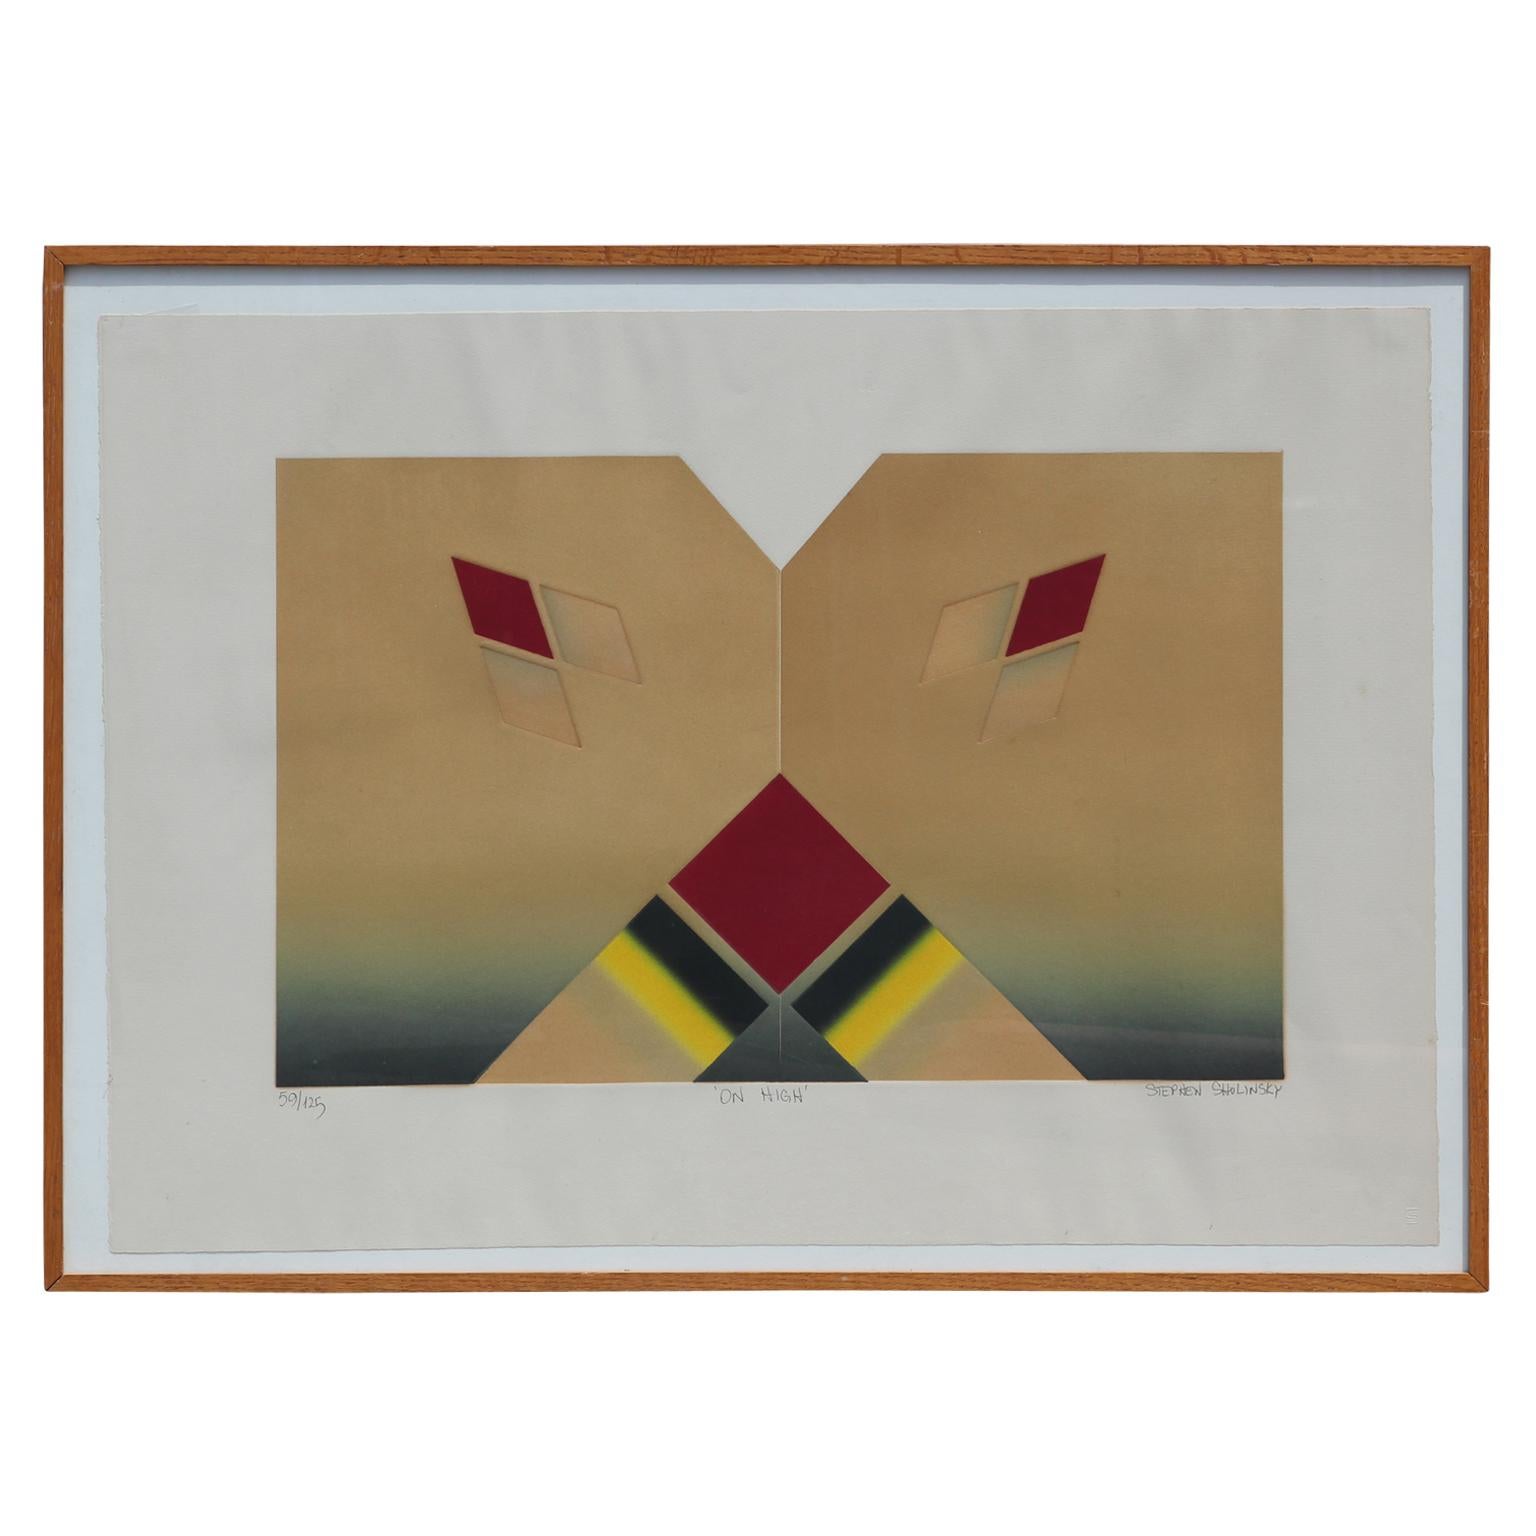 Stephen Sholinsky Abstract Print - "On High" Modern Abstract Geometric Lithograph Edition 59 of 125